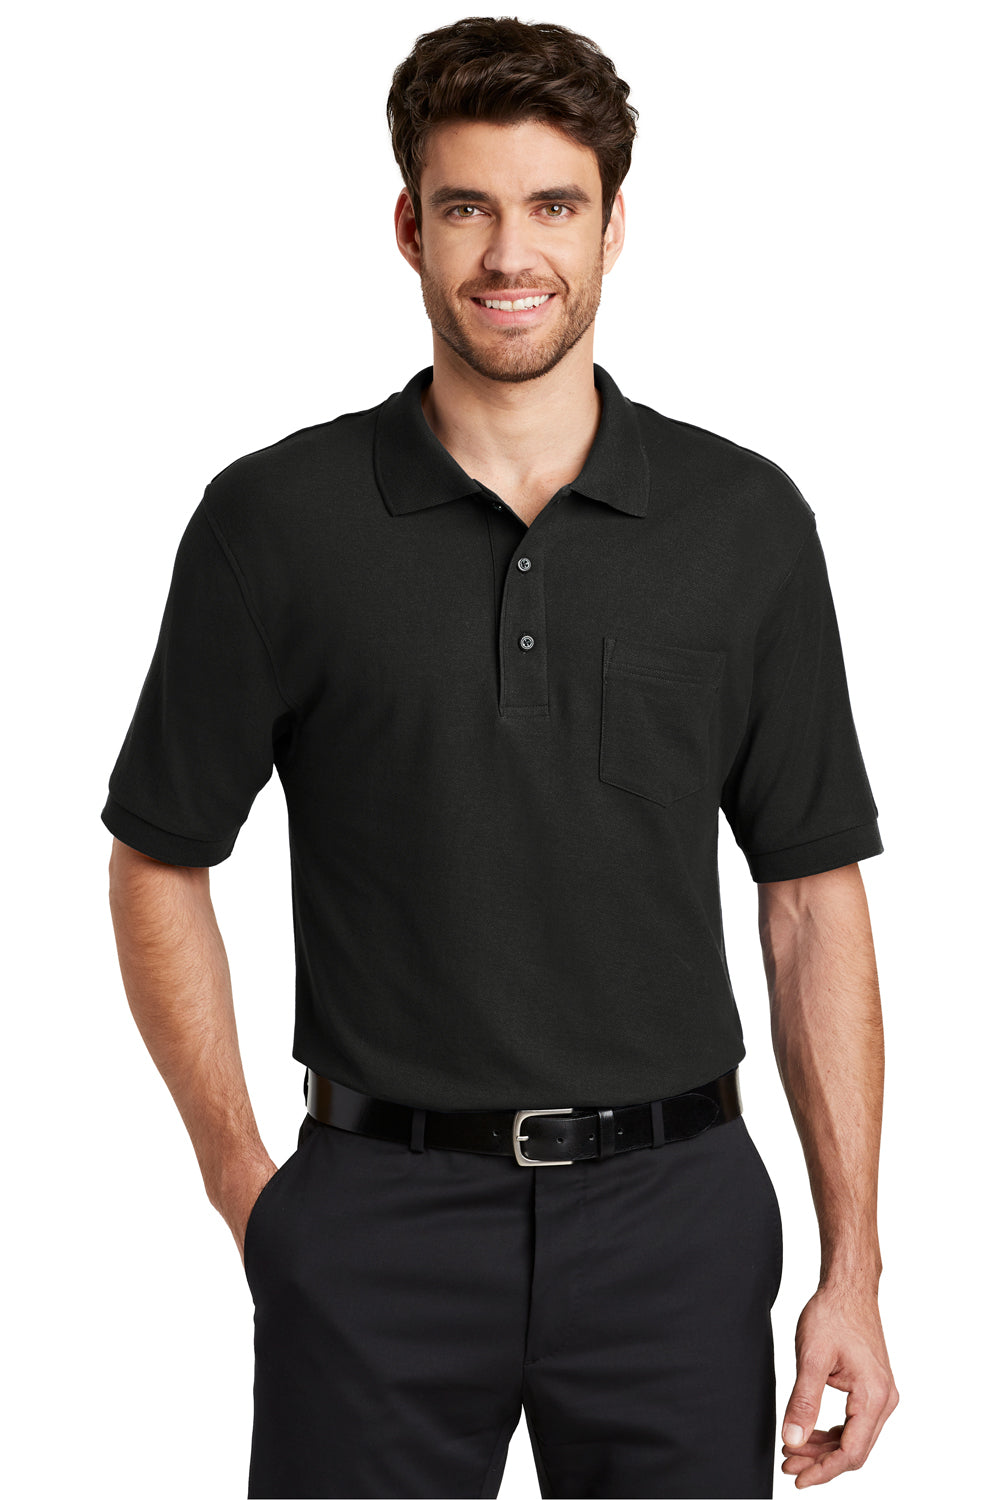 Port Authority K500P Mens Silk Touch Wrinkle Resistant Short Sleeve Polo Shirt w/ Pocket Black Front